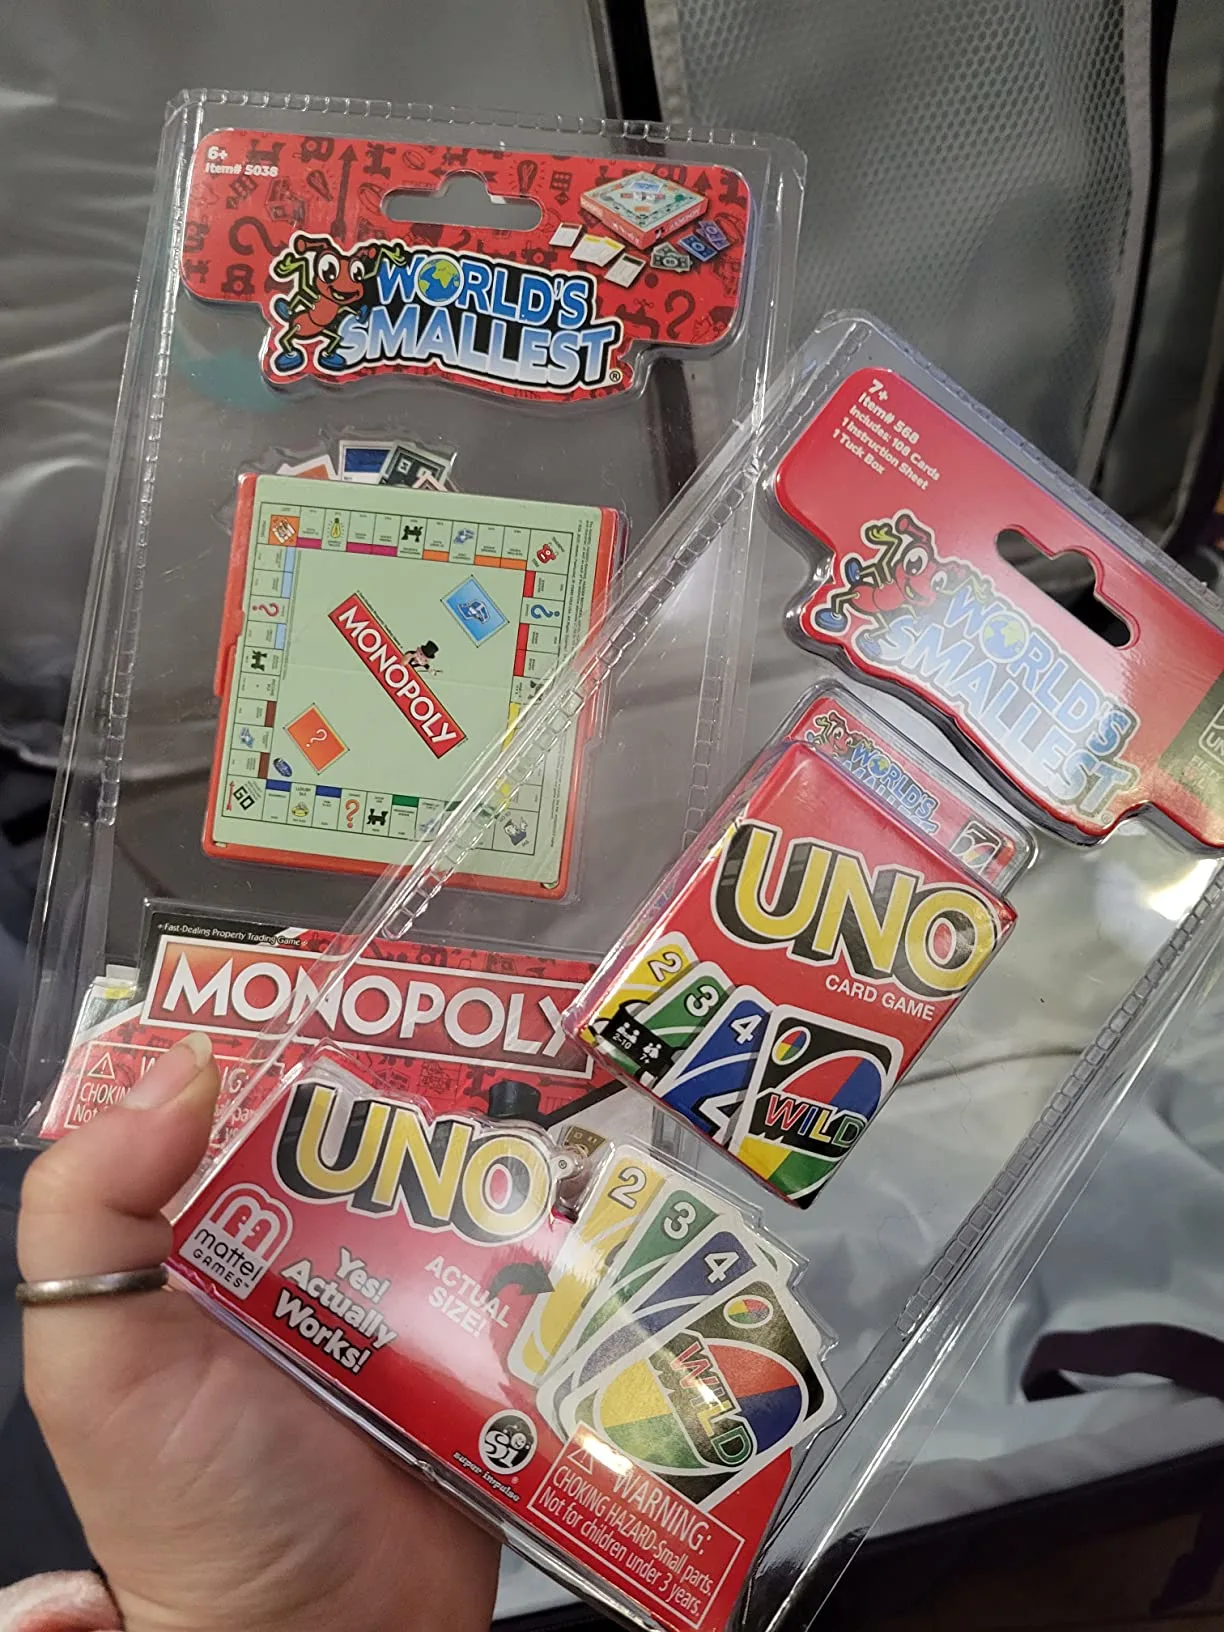 You Can Get A Miniature Uno Card Game That's Small Enough To Fit